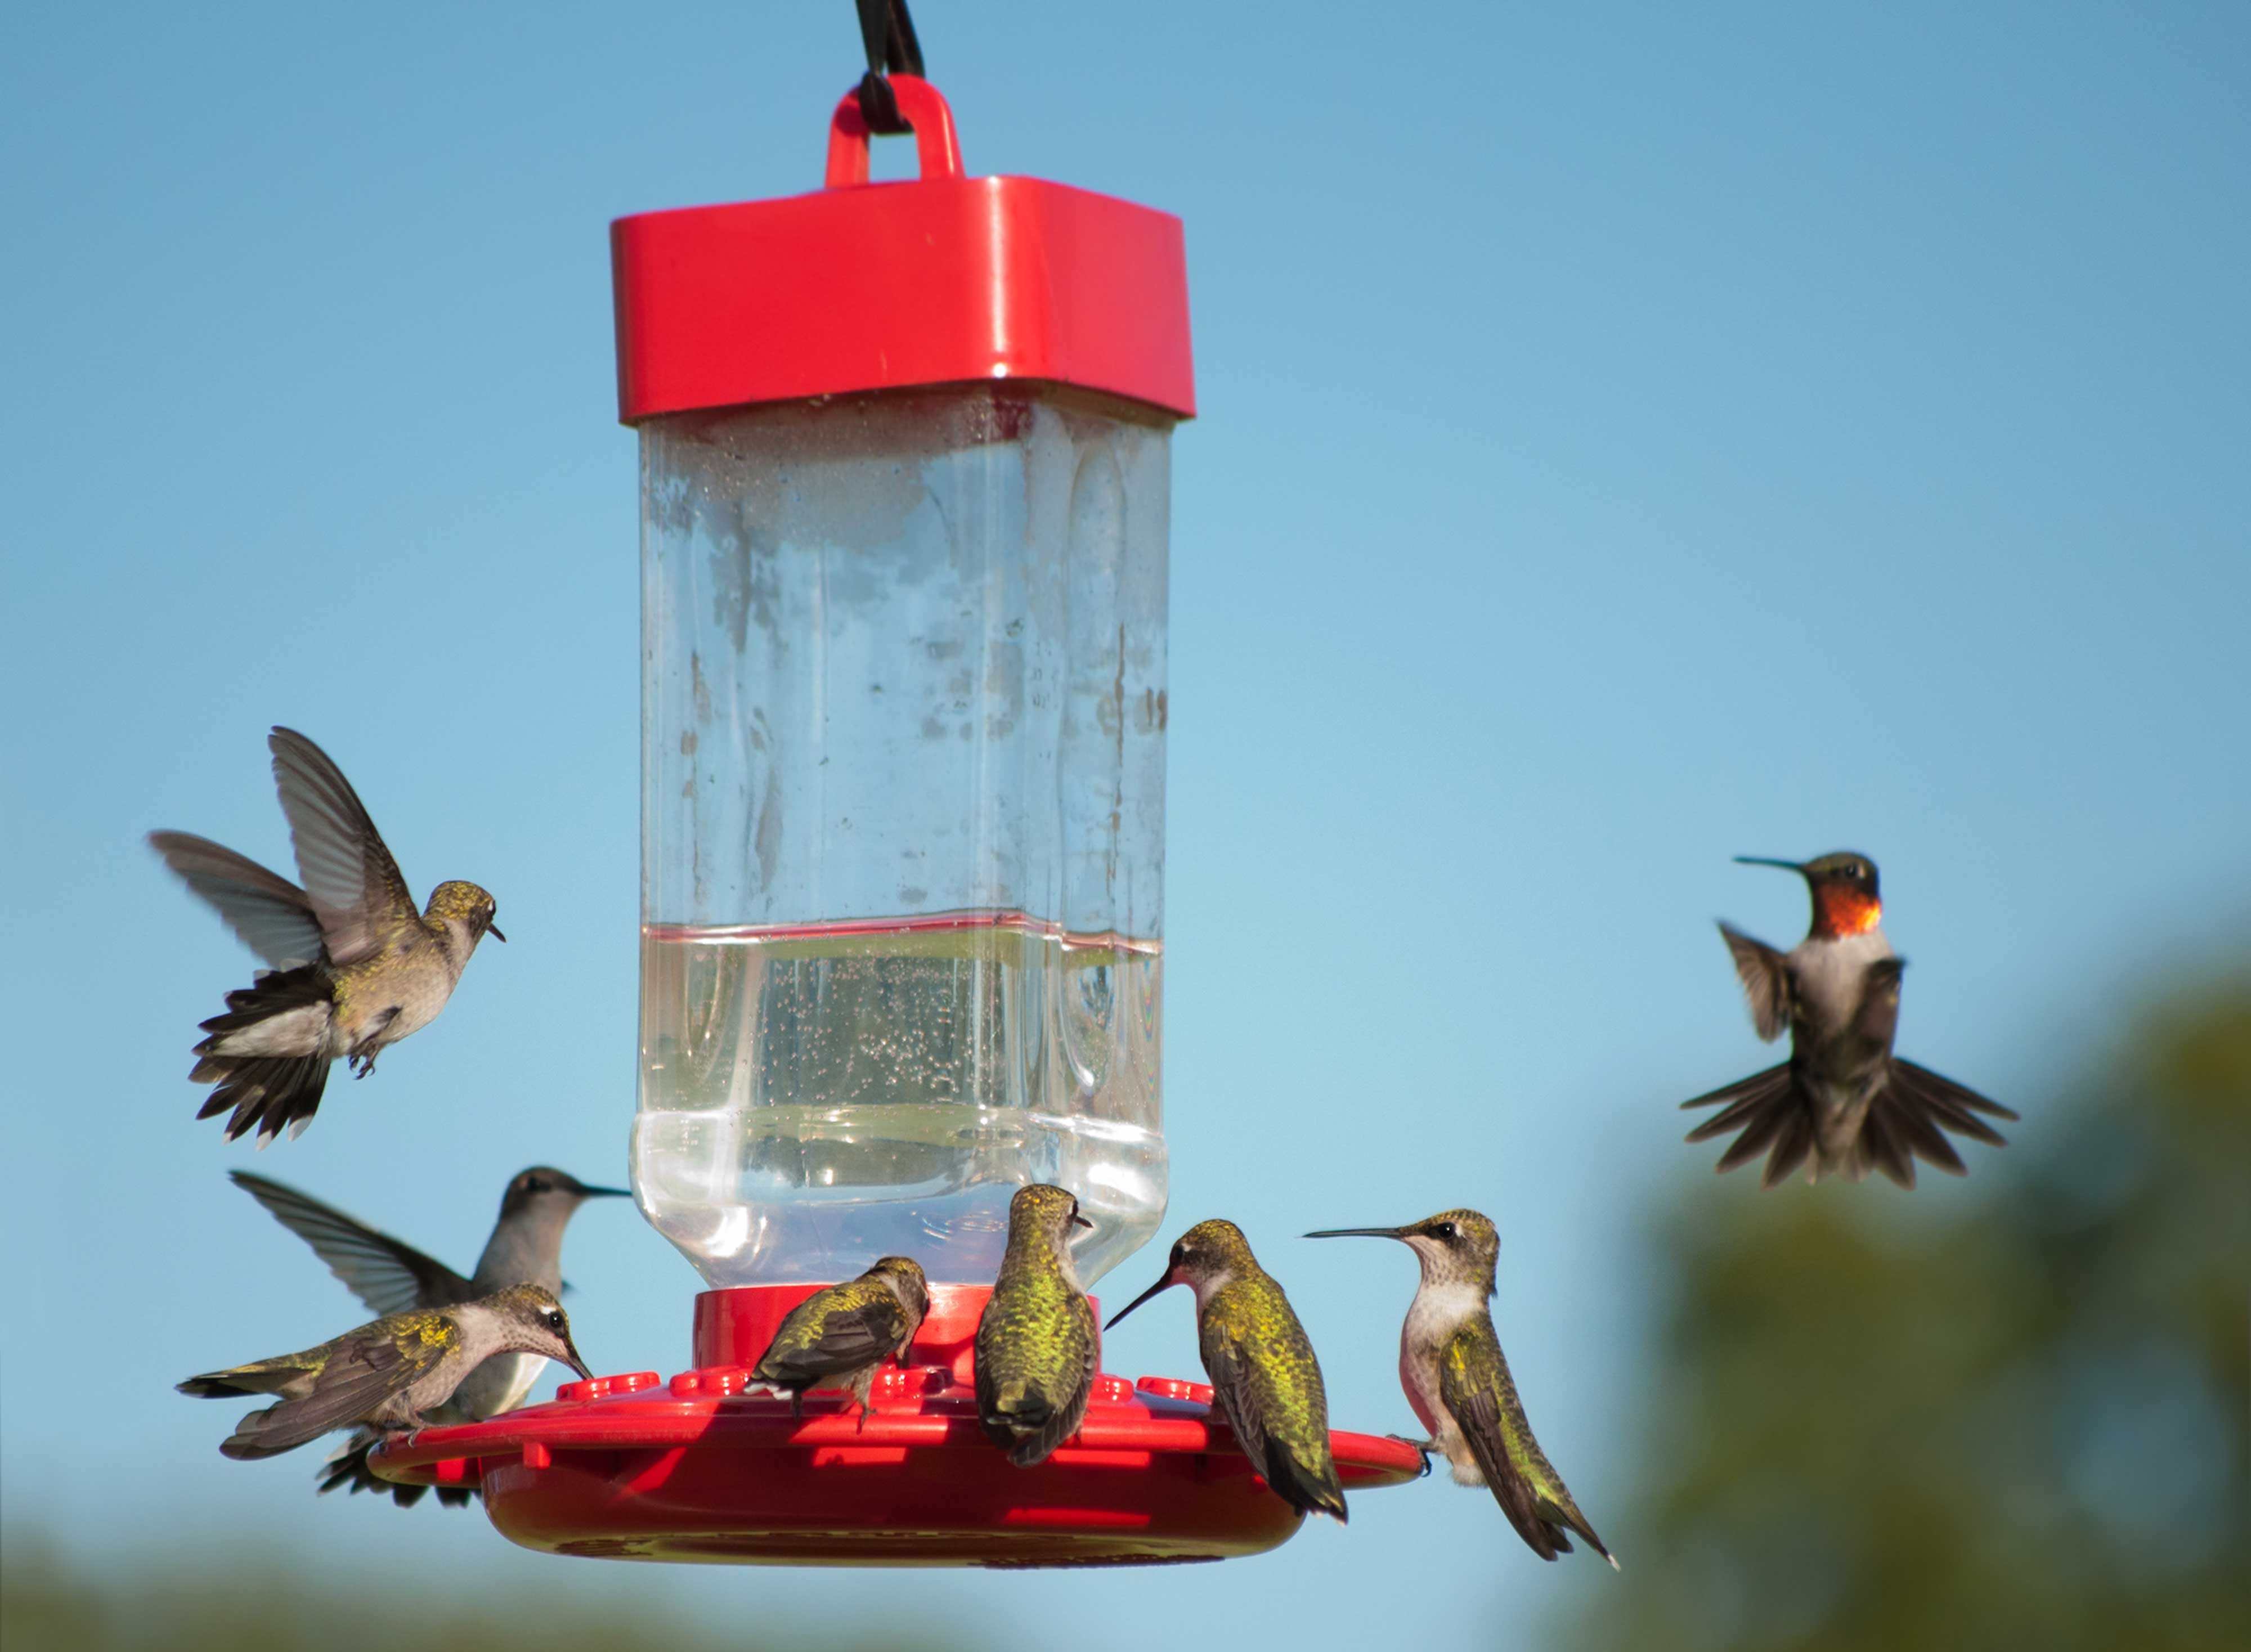 Ruby-throated hummingbirds at a feeder